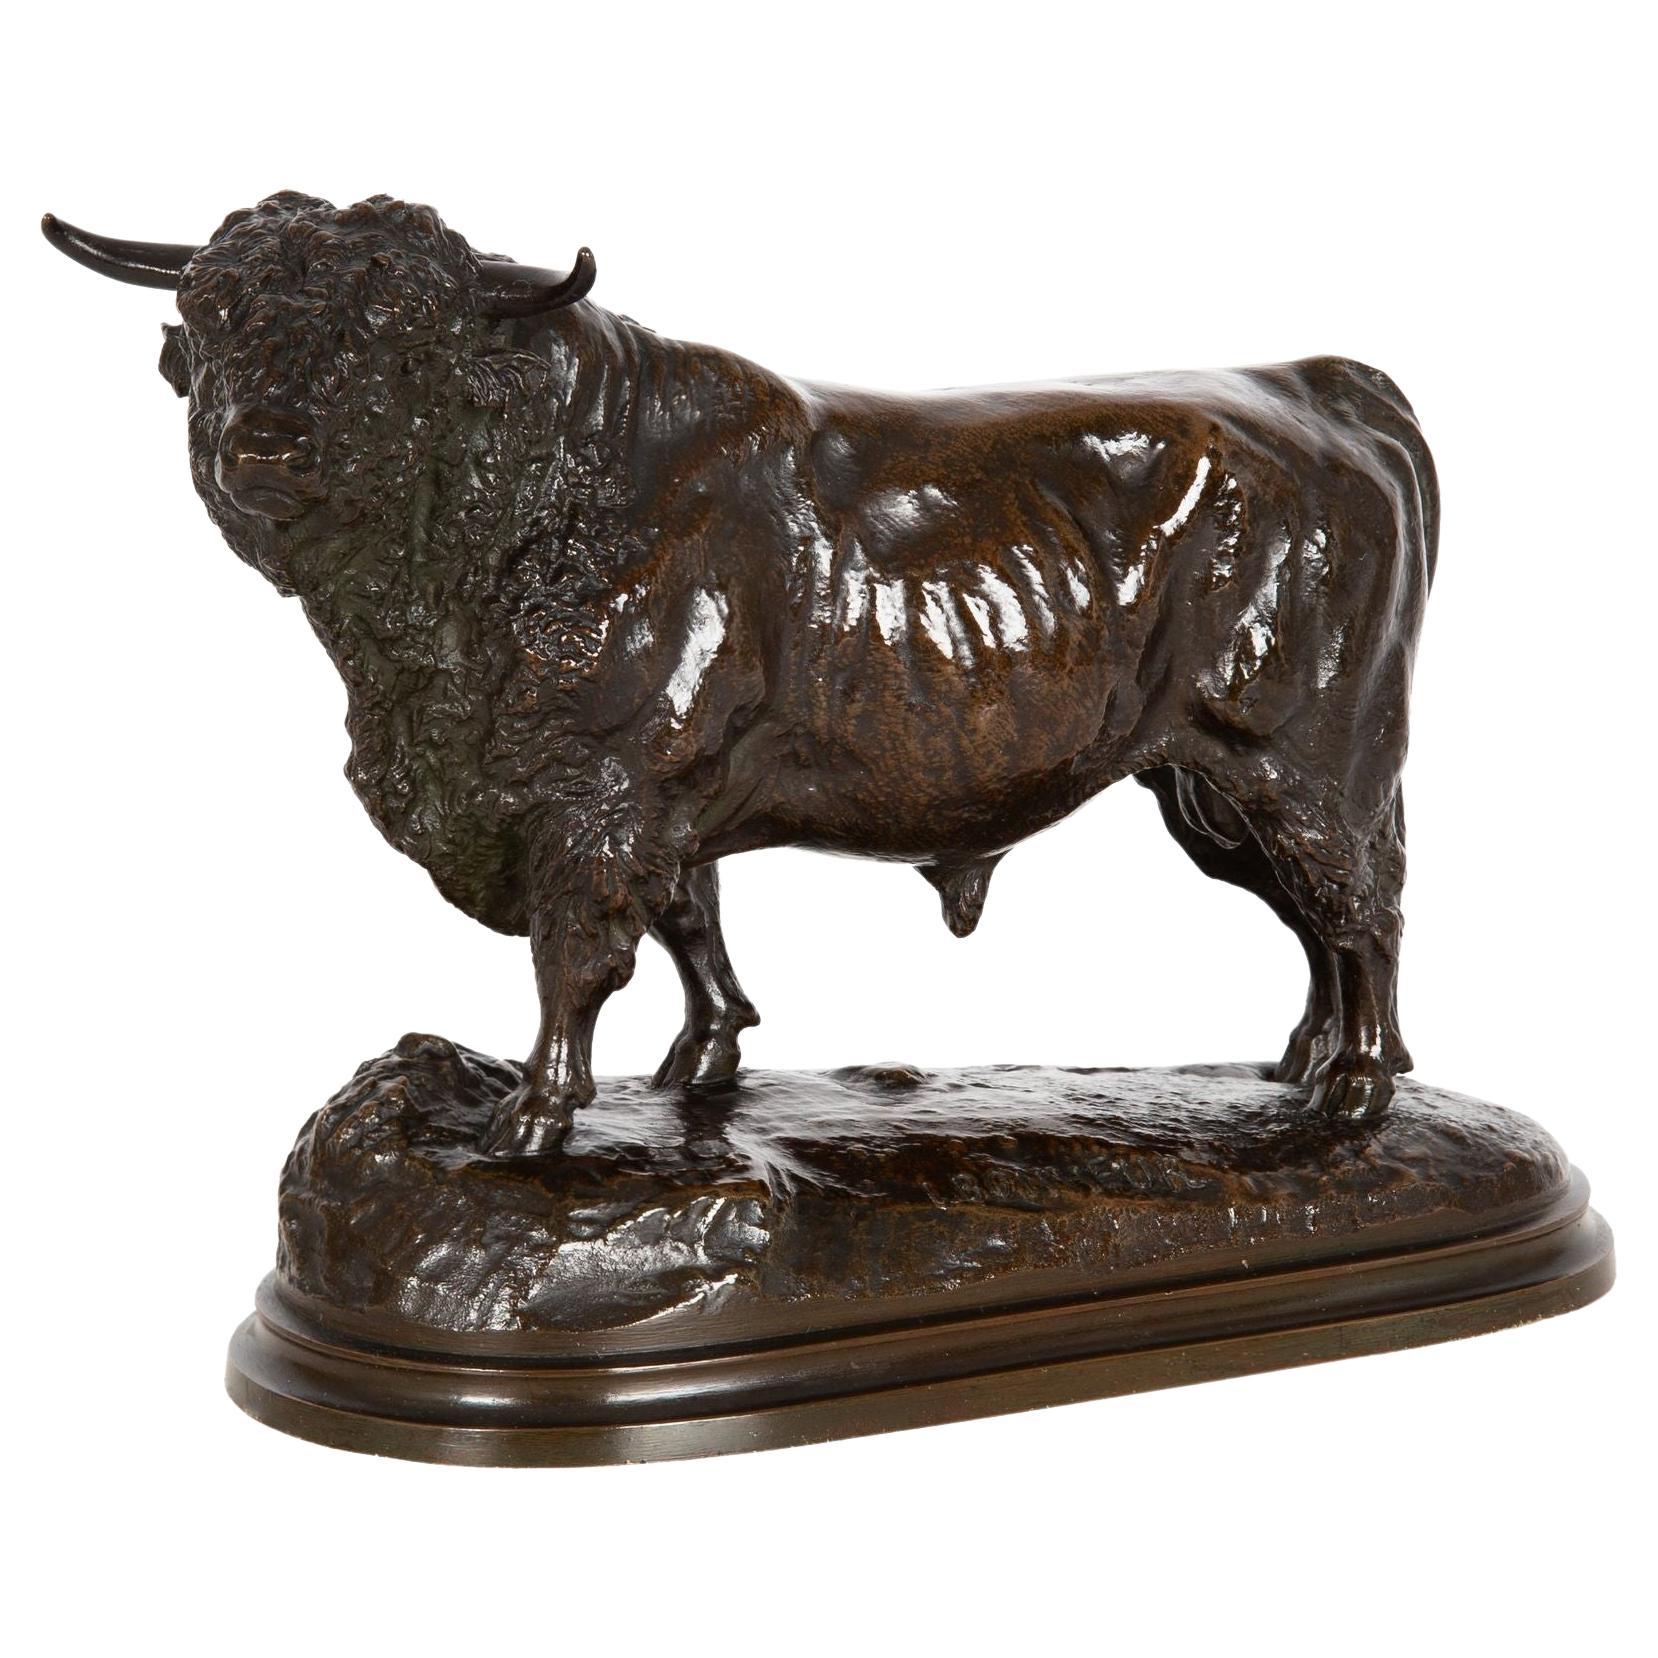 French, Antique Bronze Sculpture of Aberdeen Angus Bull by Isidore Bonheur